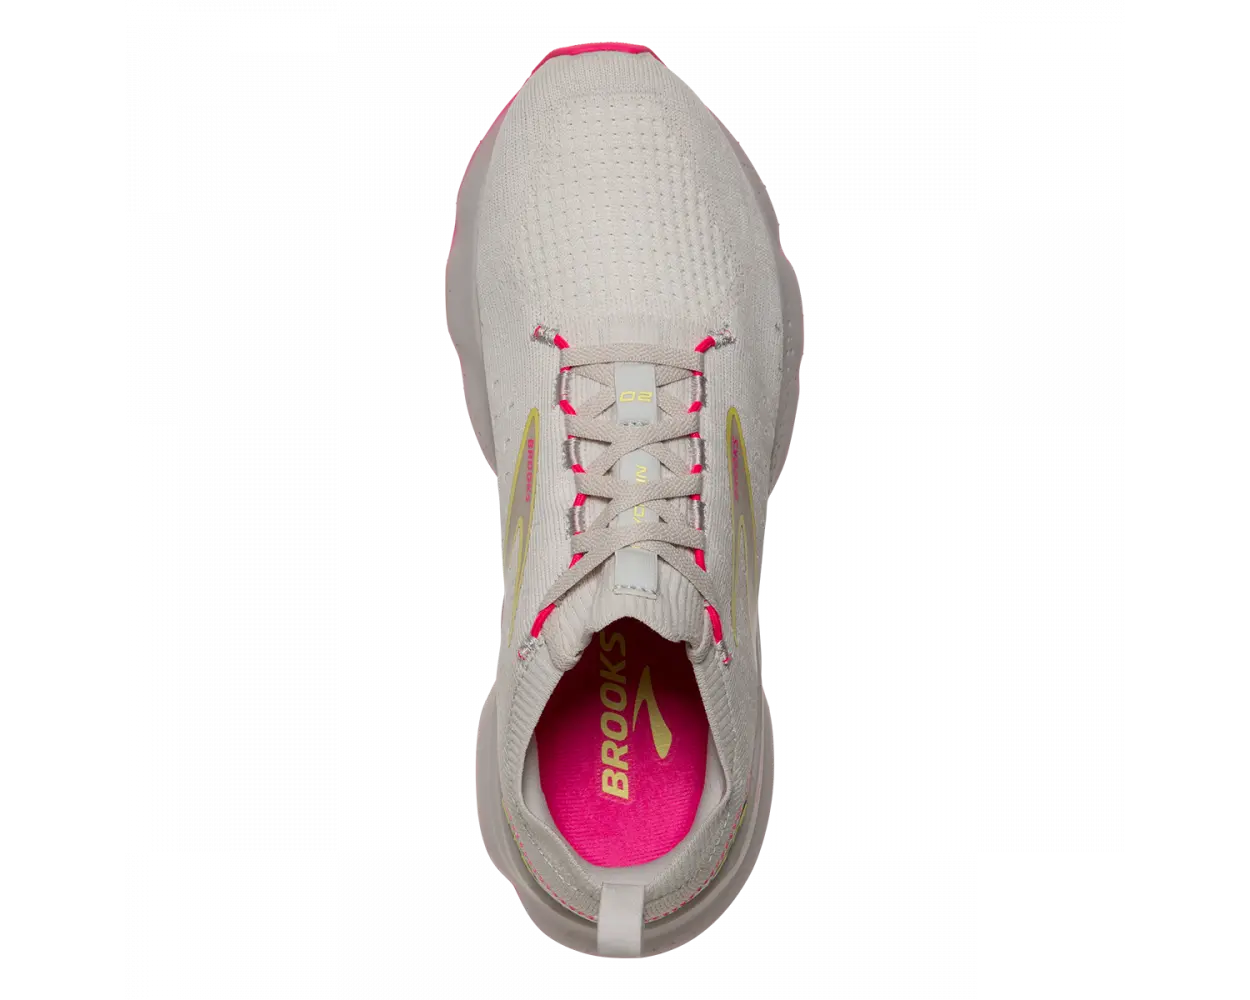 Top view of the Women's Glycerin Stealthfit 20 in the color Grey/Yellow/Pink